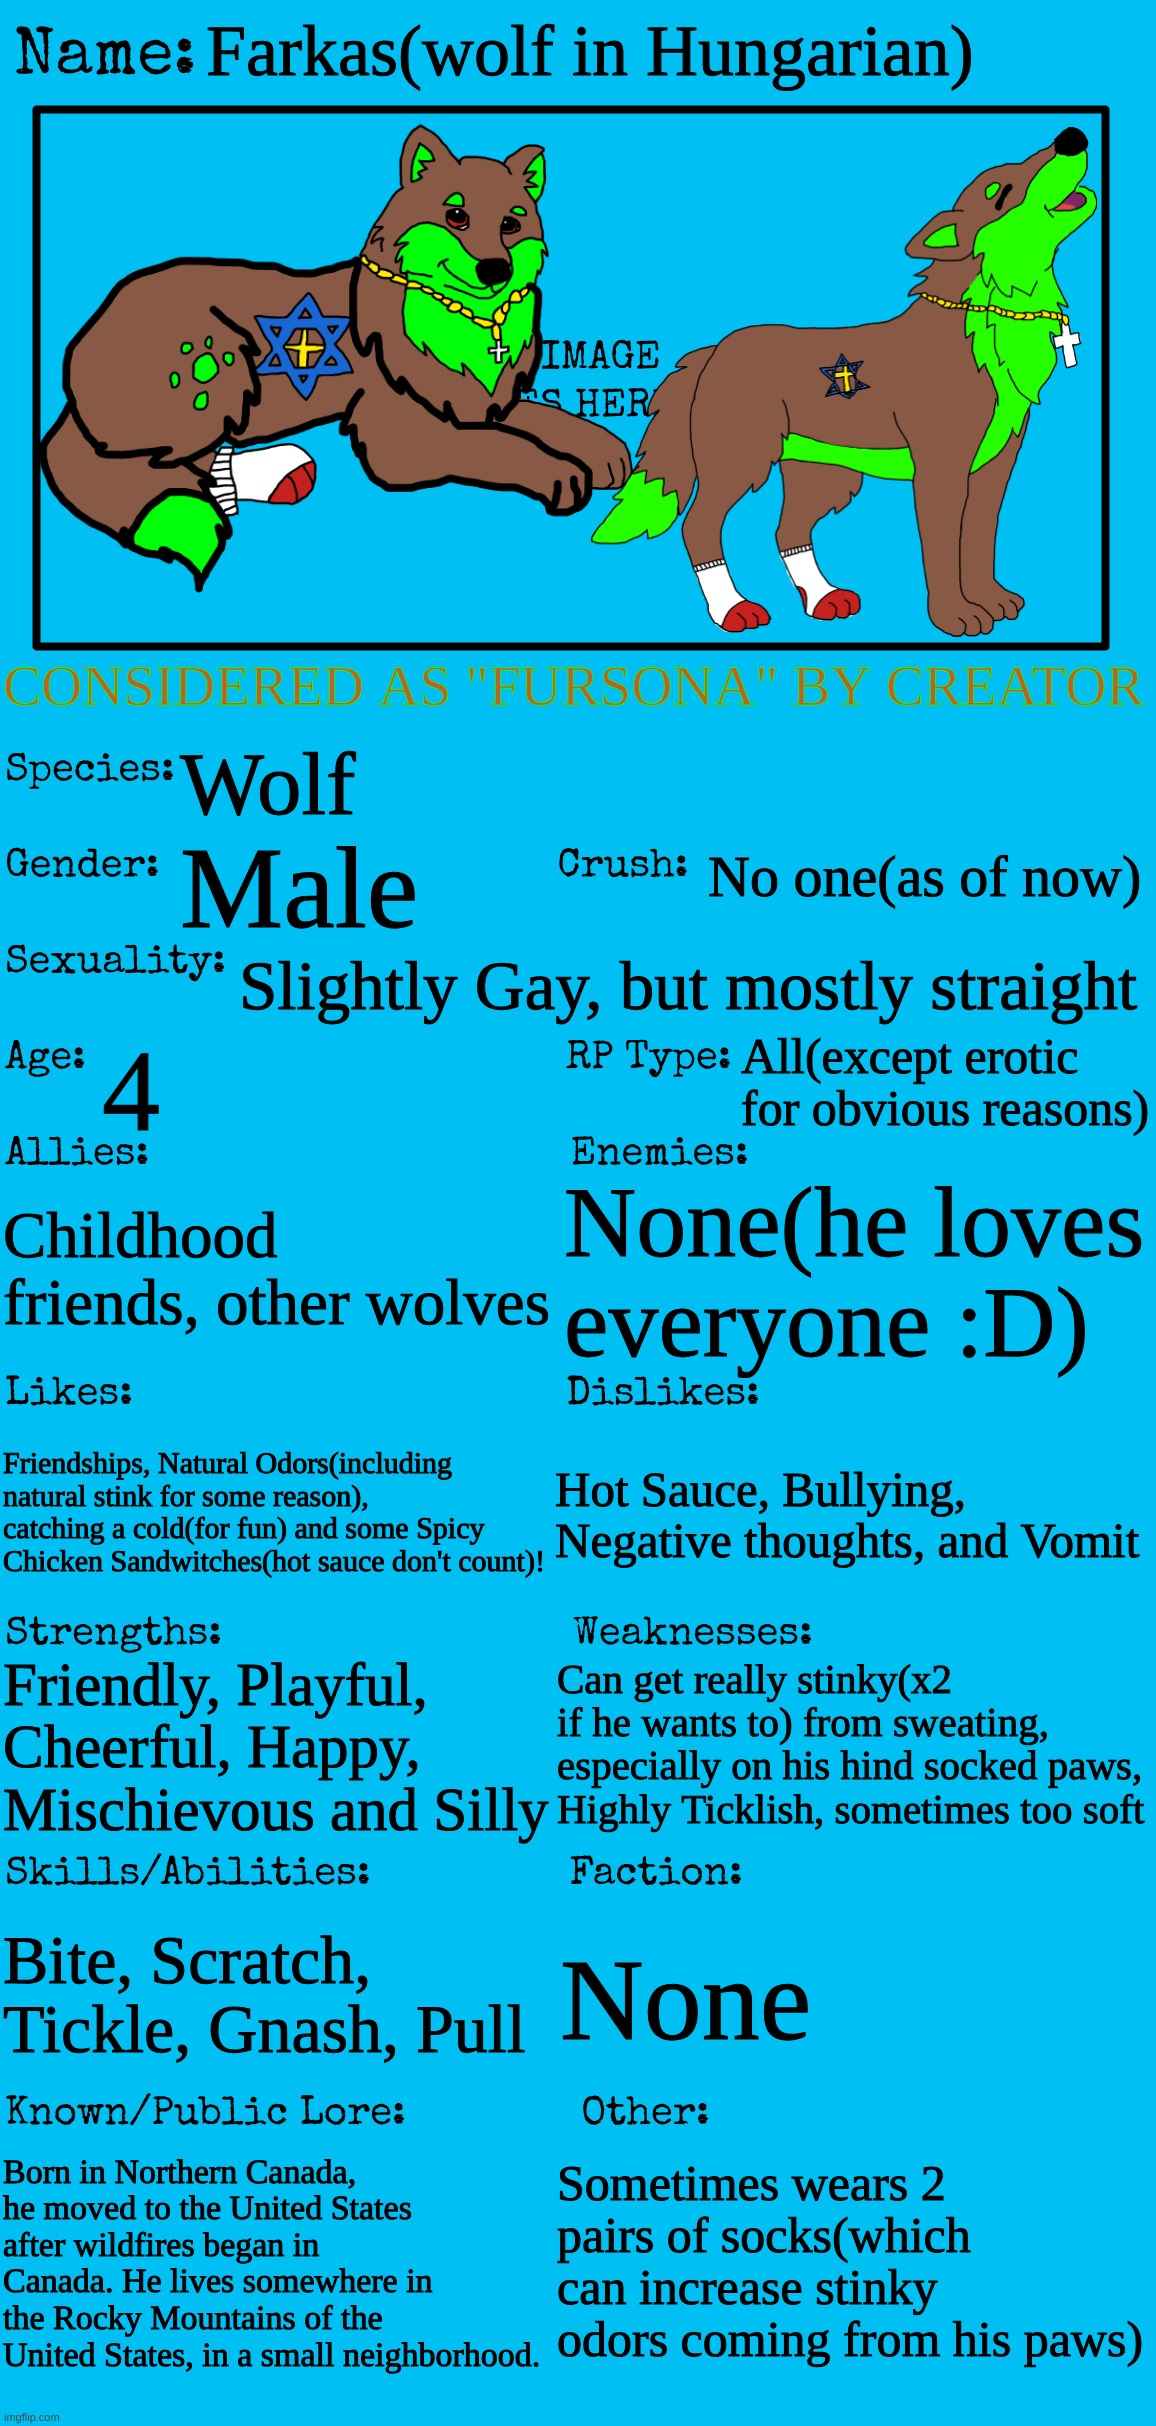 Official Farkas Bio(he's my Fursona :3) | Farkas(wolf in Hungarian); CONSIDERED AS "FURSONA" BY CREATOR; Wolf; No one(as of now); Male; Slightly Gay, but mostly straight; 4; All(except erotic for obvious reasons); Childhood friends, other wolves; None(he loves everyone :D); Friendships, Natural Odors(including natural stink for some reason), catching a cold(for fun) and some Spicy Chicken Sandwitches(hot sauce don't count)! Hot Sauce, Bullying, Negative thoughts, and Vomit; Can get really stinky(x2 if he wants to) from sweating, especially on his hind socked paws, Highly Ticklish, sometimes too soft; Friendly, Playful, Cheerful, Happy, Mischievous and Silly; Bite, Scratch, Tickle, Gnash, Pull; None; Born in Northern Canada, he moved to the United States after wildfires began in Canada. He lives somewhere in the Rocky Mountains of the United States, in a small neighborhood. Sometimes wears 2 pairs of socks(which can increase stinky odors coming from his paws) | made w/ Imgflip meme maker